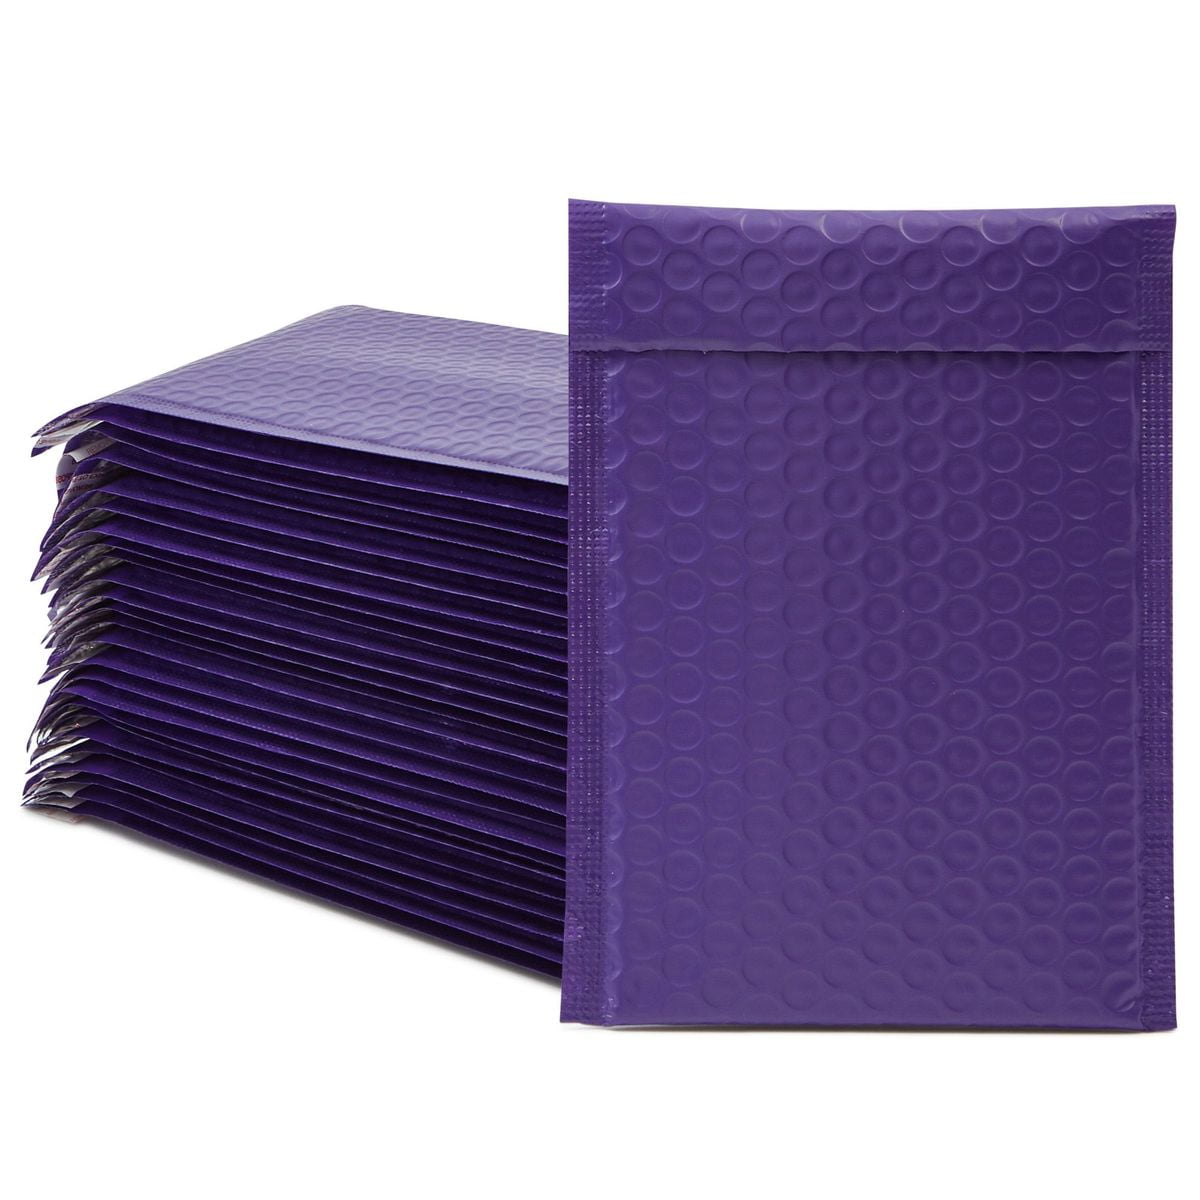 Padded Shipping Mailing Envelopes 40 New Purple 4x8 Bubble Mailers 